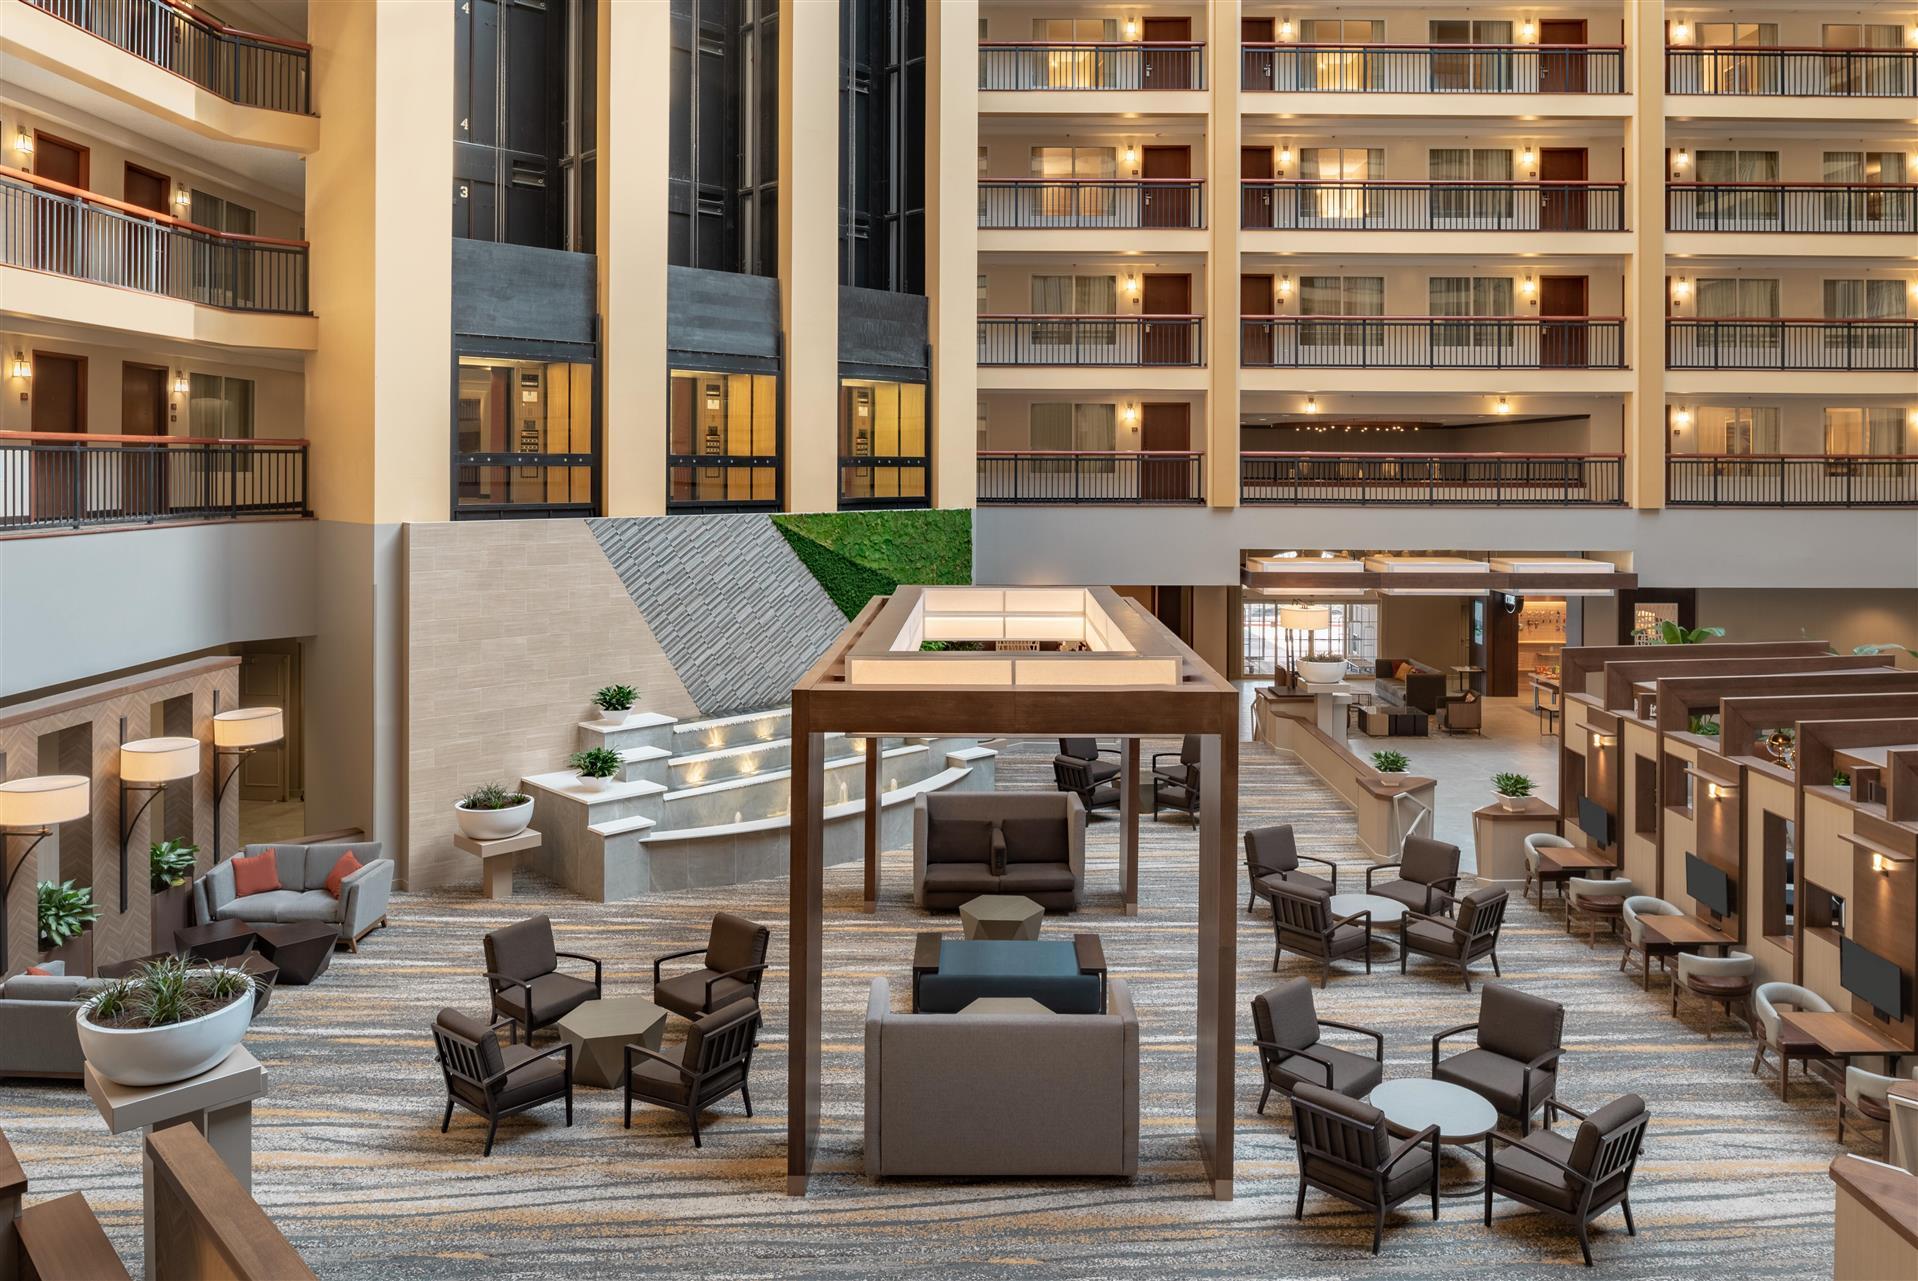 Embassy Suites by Hilton Cleveland Rockside in Independence, OH